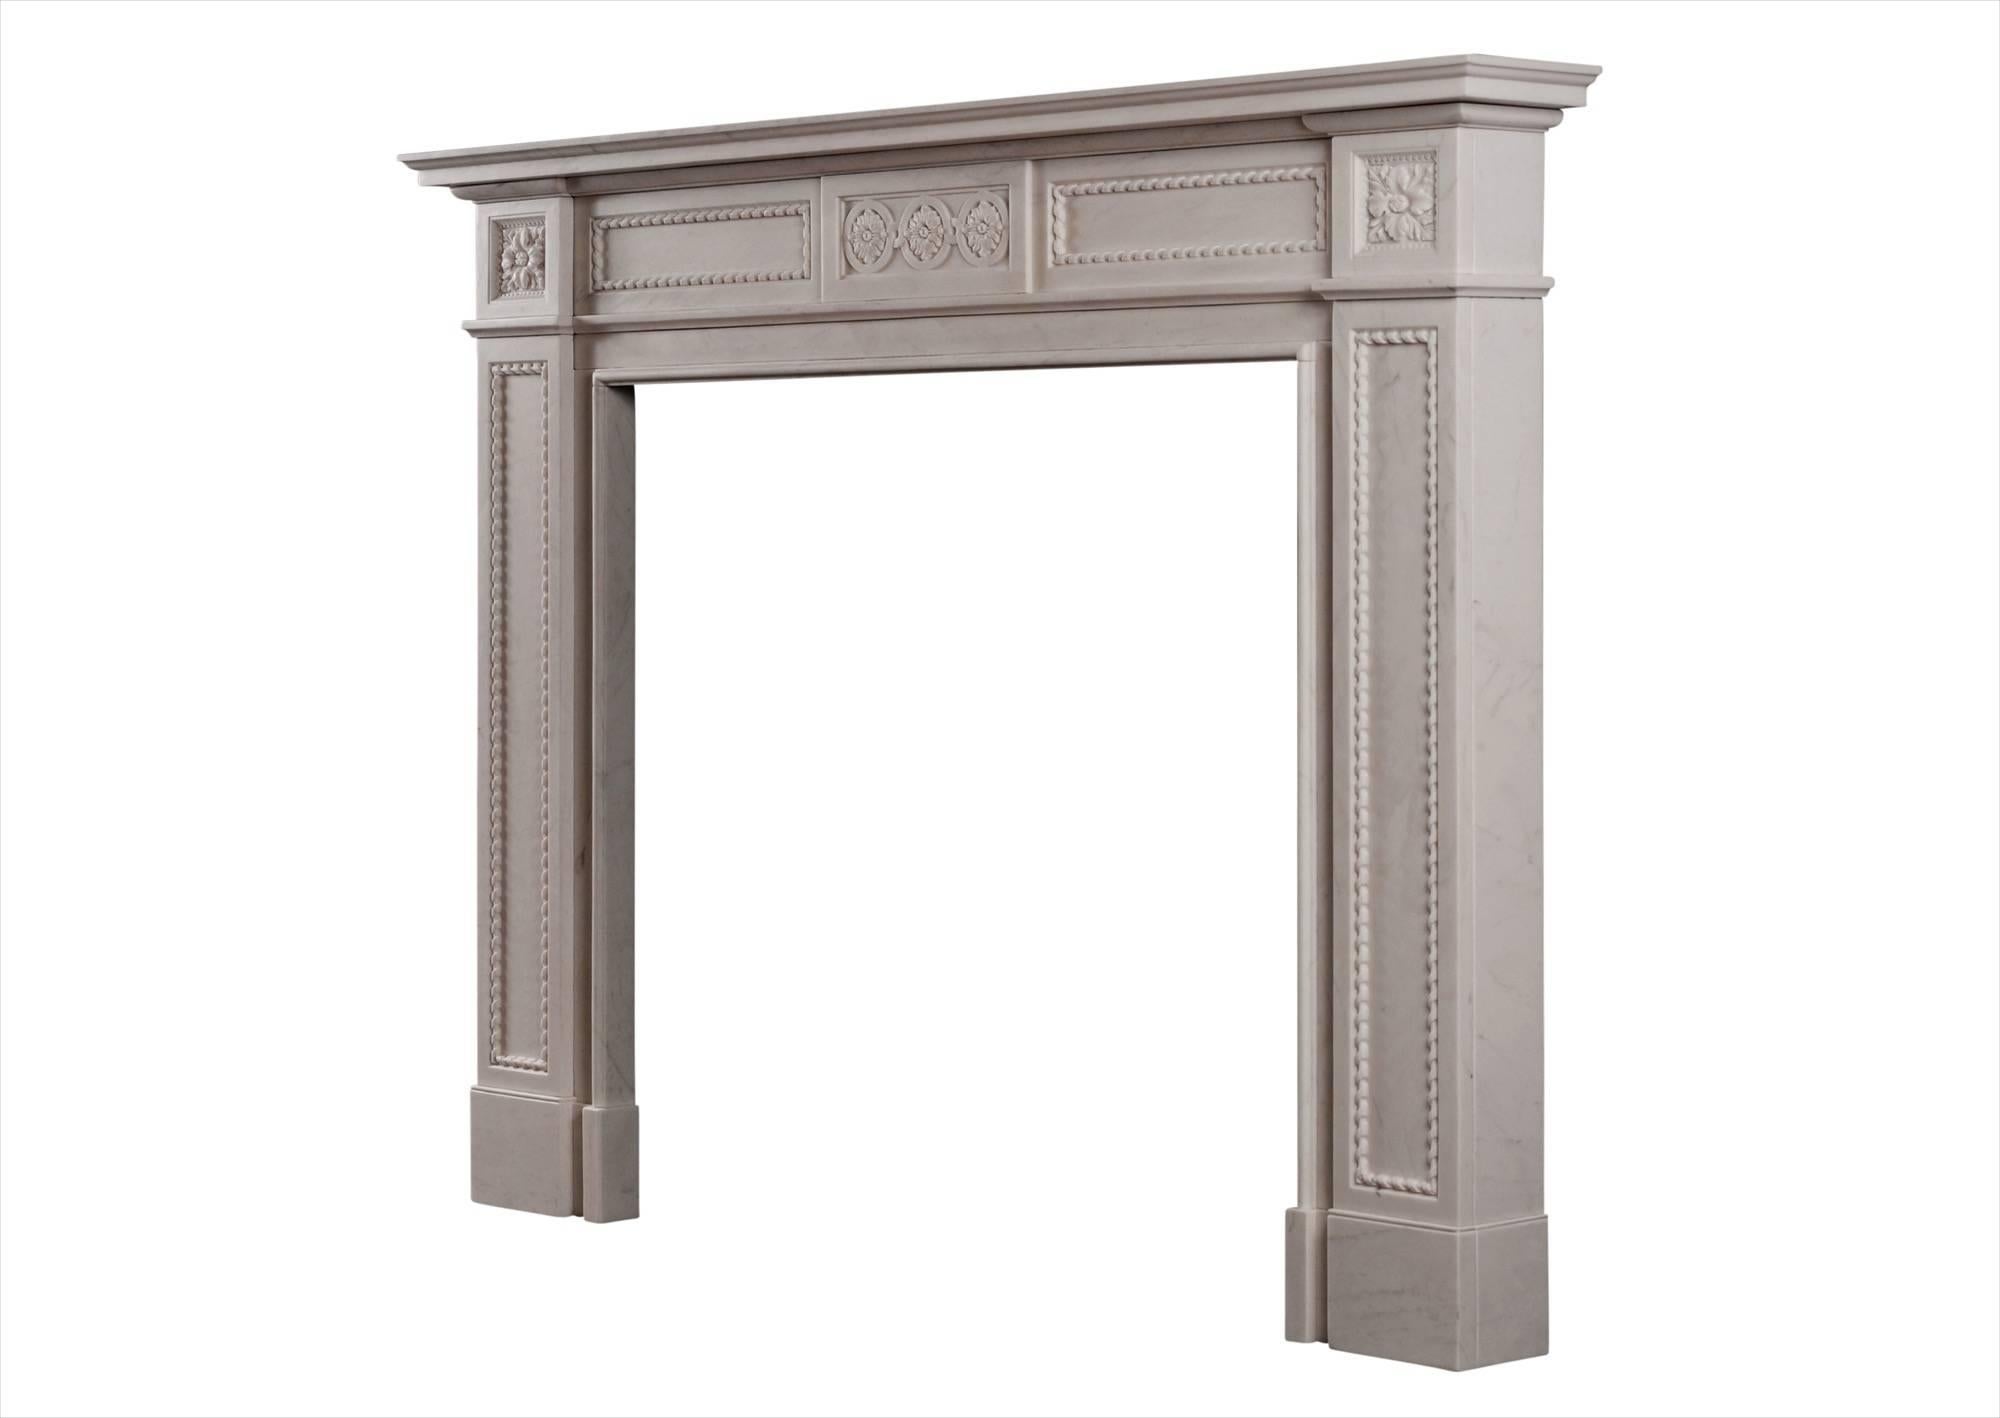 19th Century Attractive English Fireplace in the Regency Style